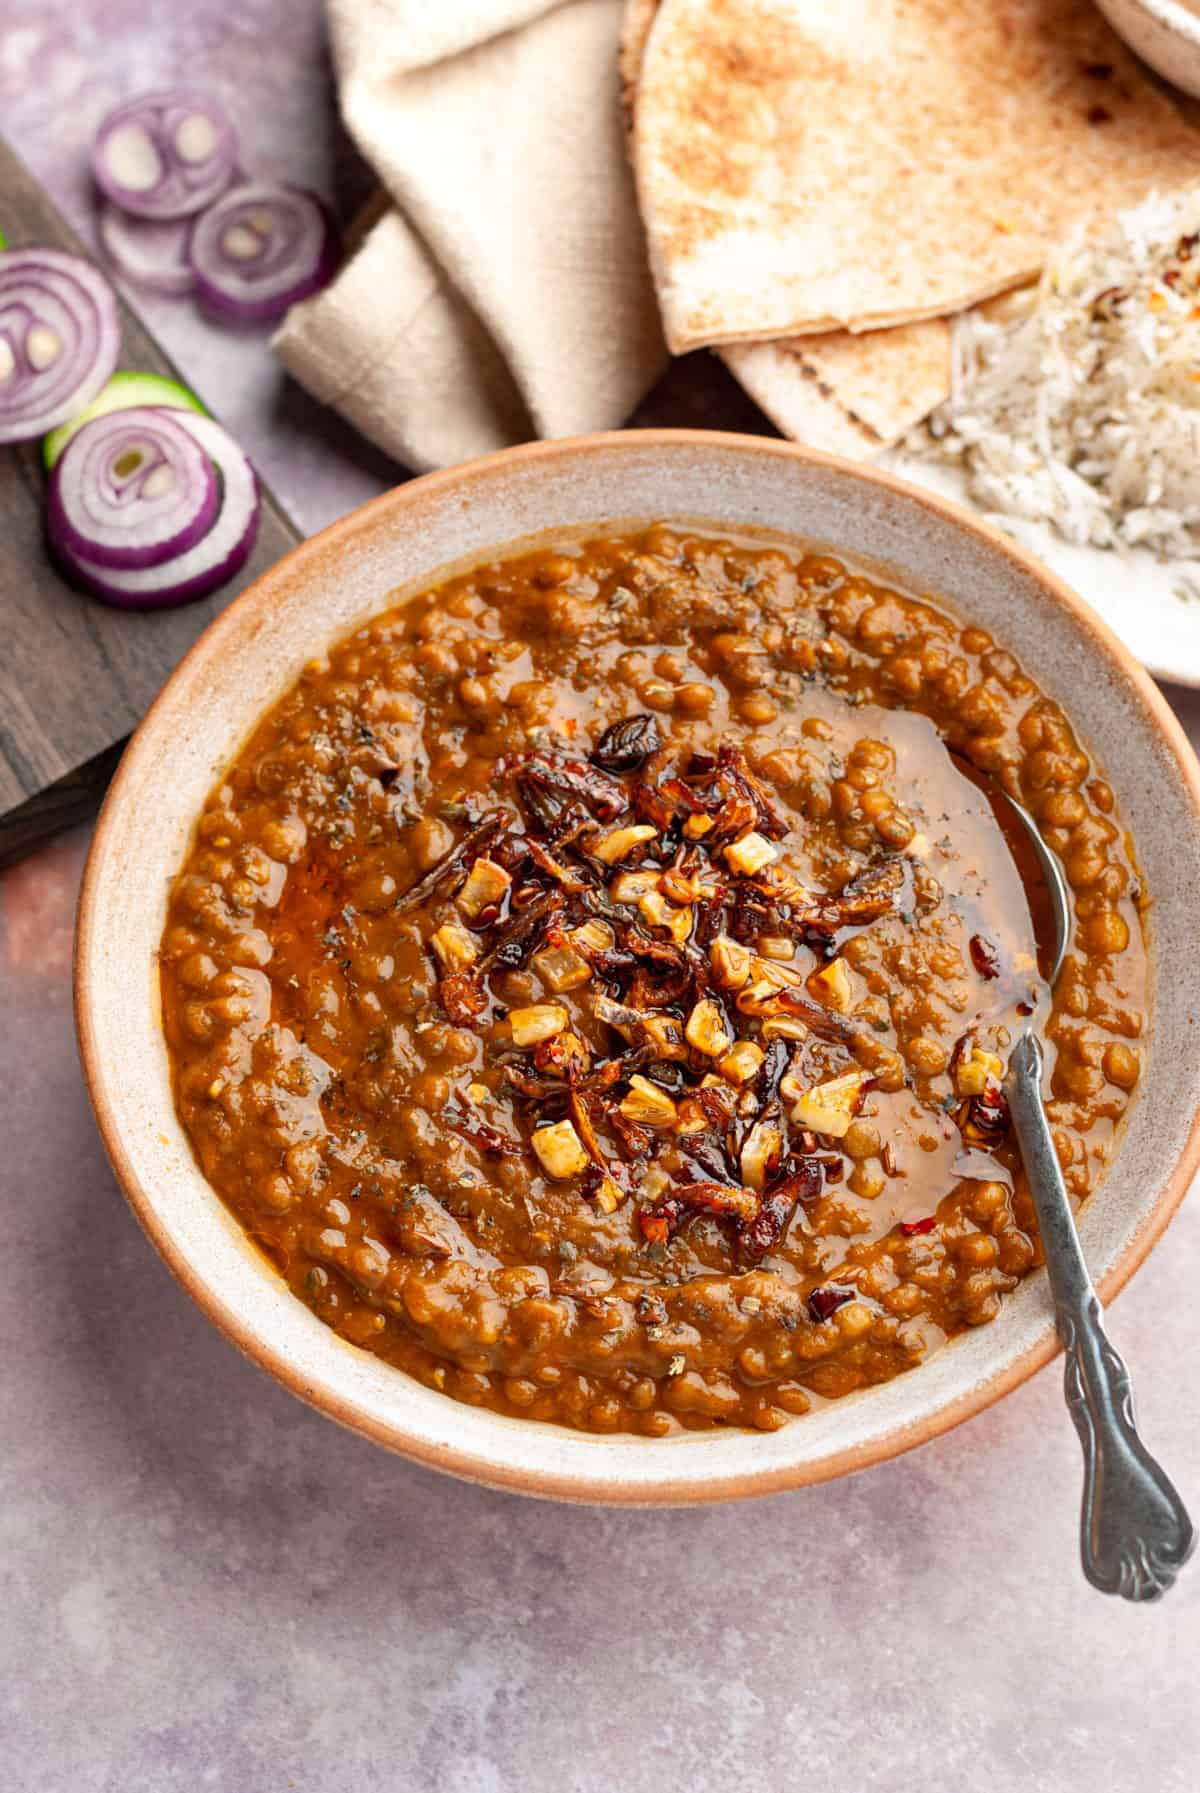 whole masoor dal in bowl with spoon

